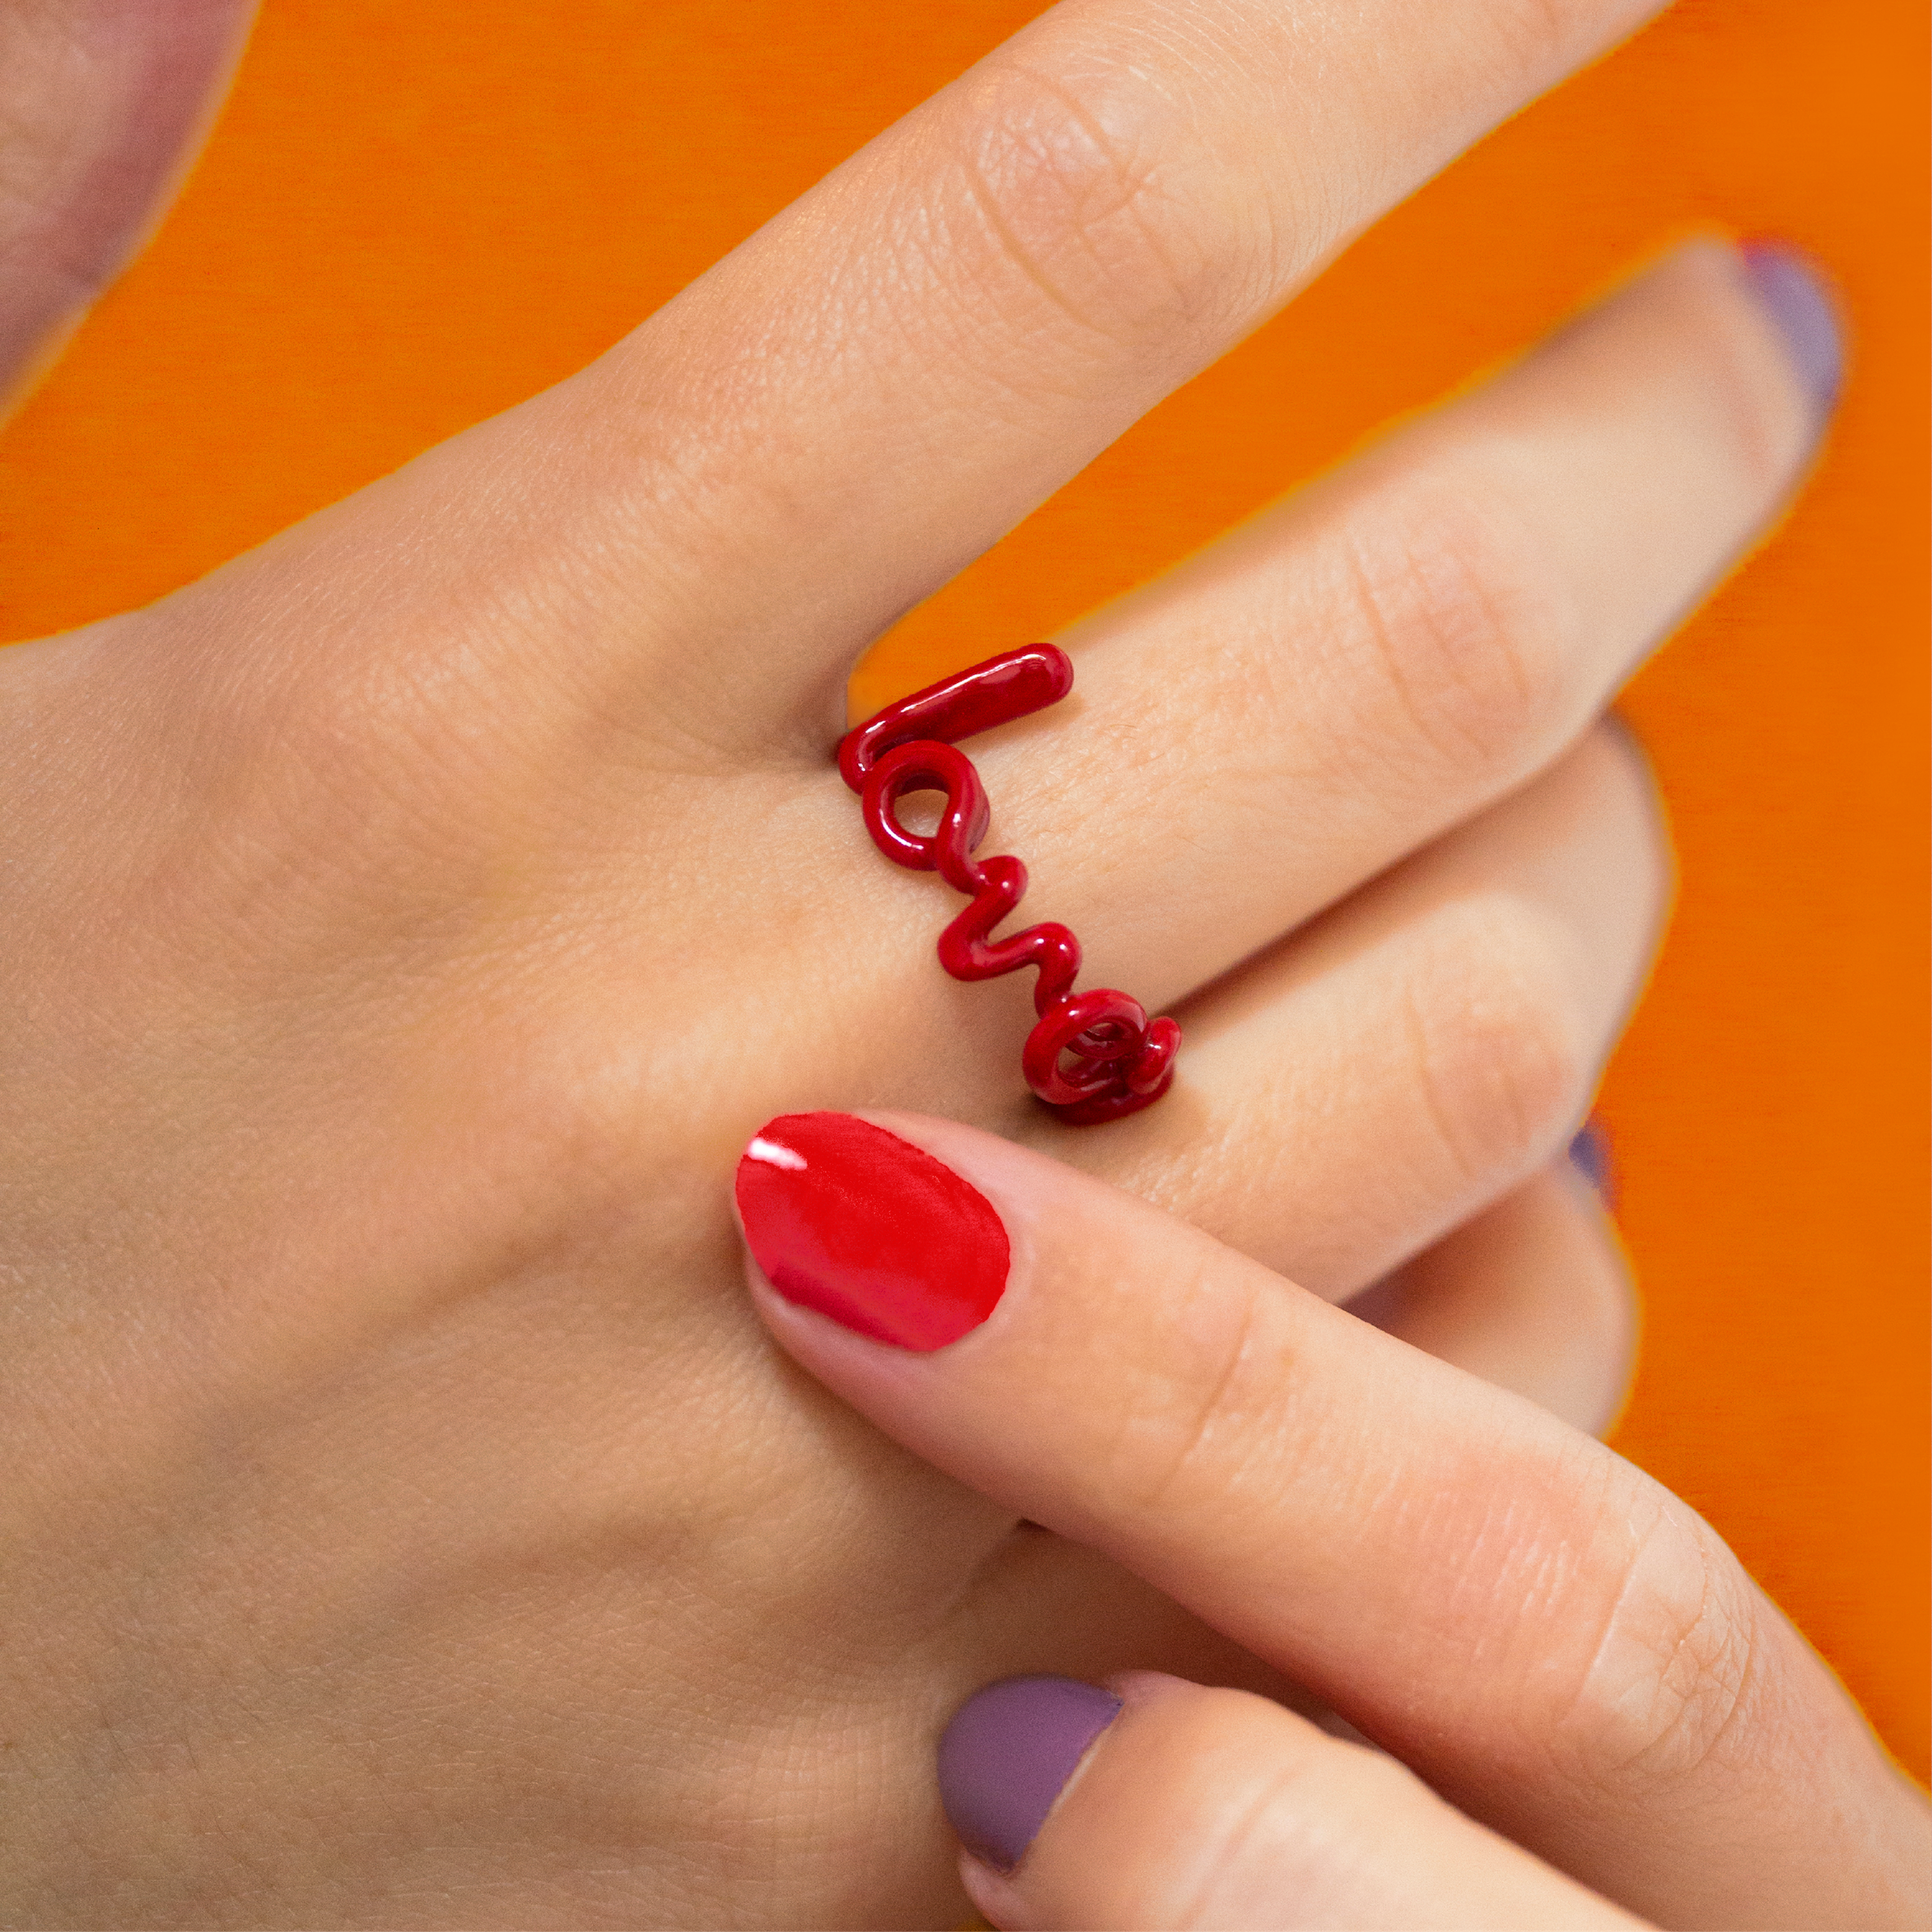 Lover Hotscripts ring in Classic Red enamel on hand